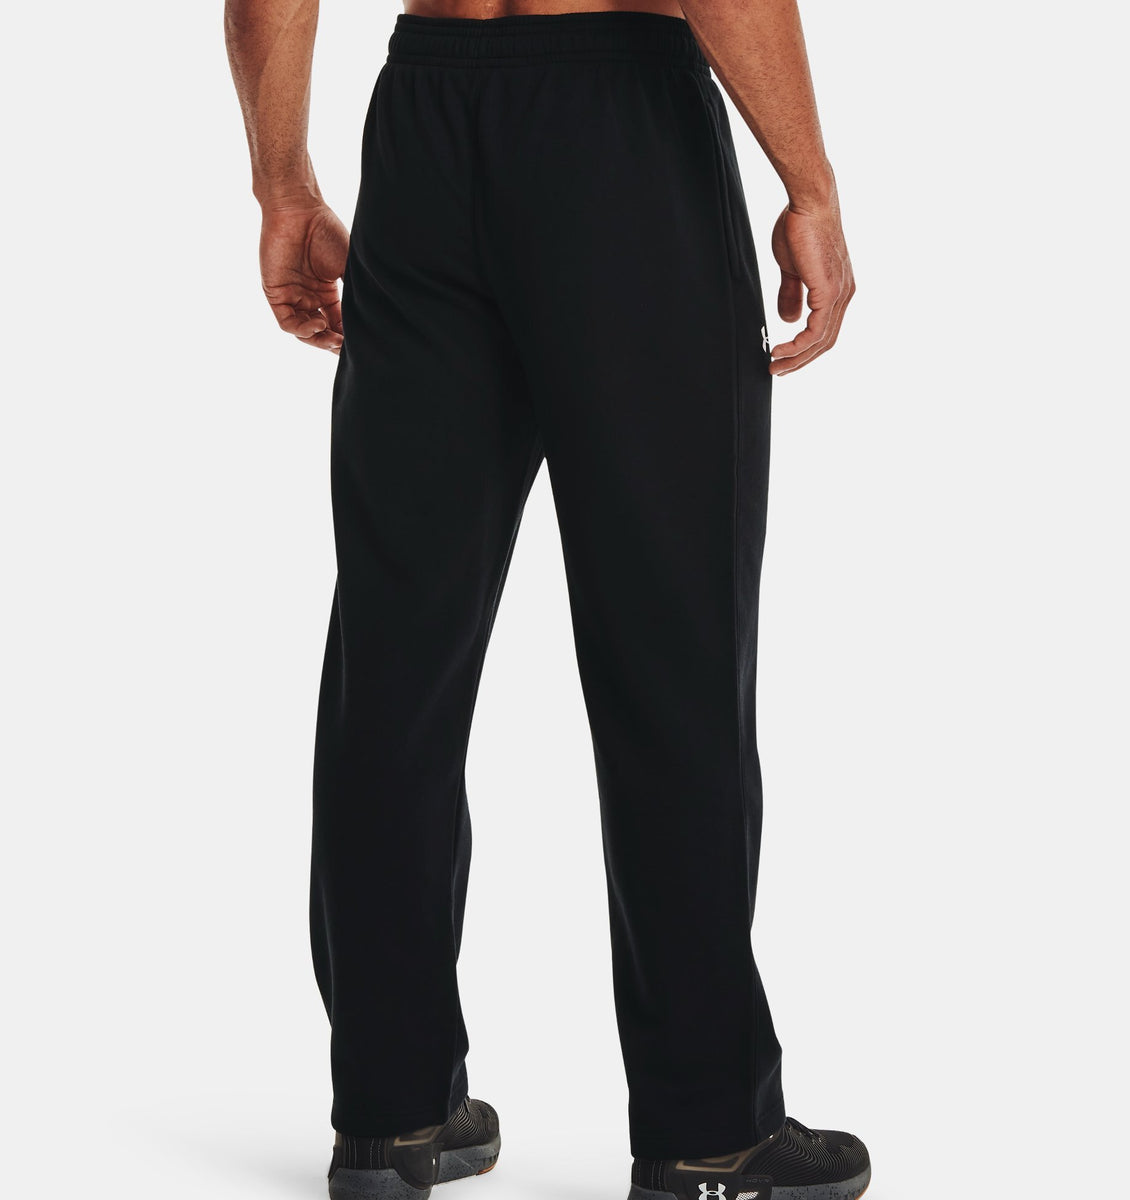  Under Armour Hustle Fleece Team Pant Mens 1300124 - Navy - L :  Clothing, Shoes & Jewelry